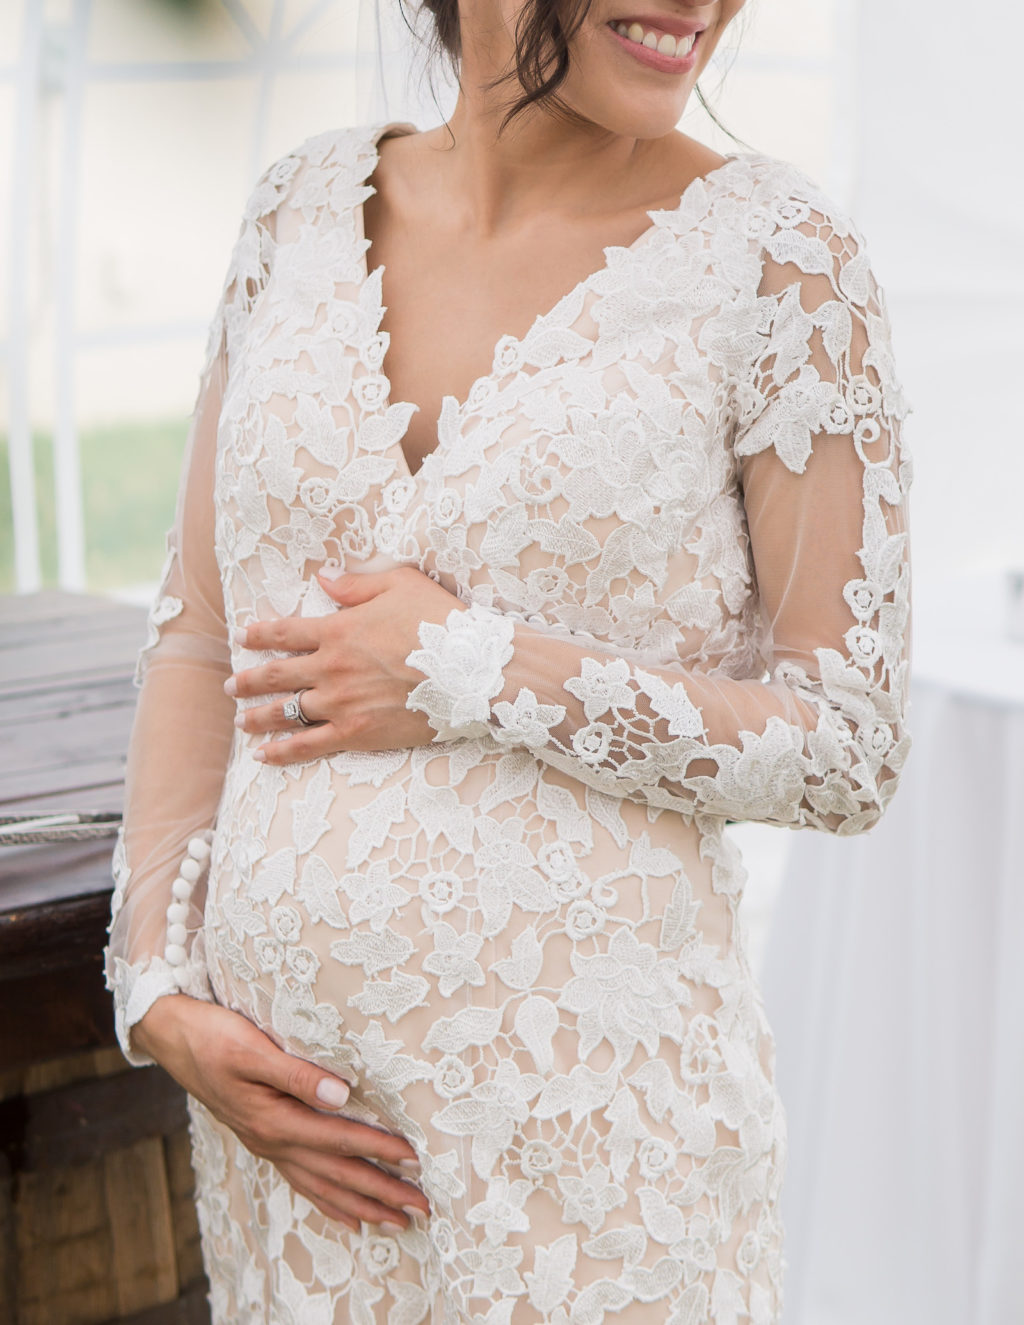 Bride Wearing Romantic Lace and Illusion Long Sleeve Wedding Dress Holding Pregnant Belly